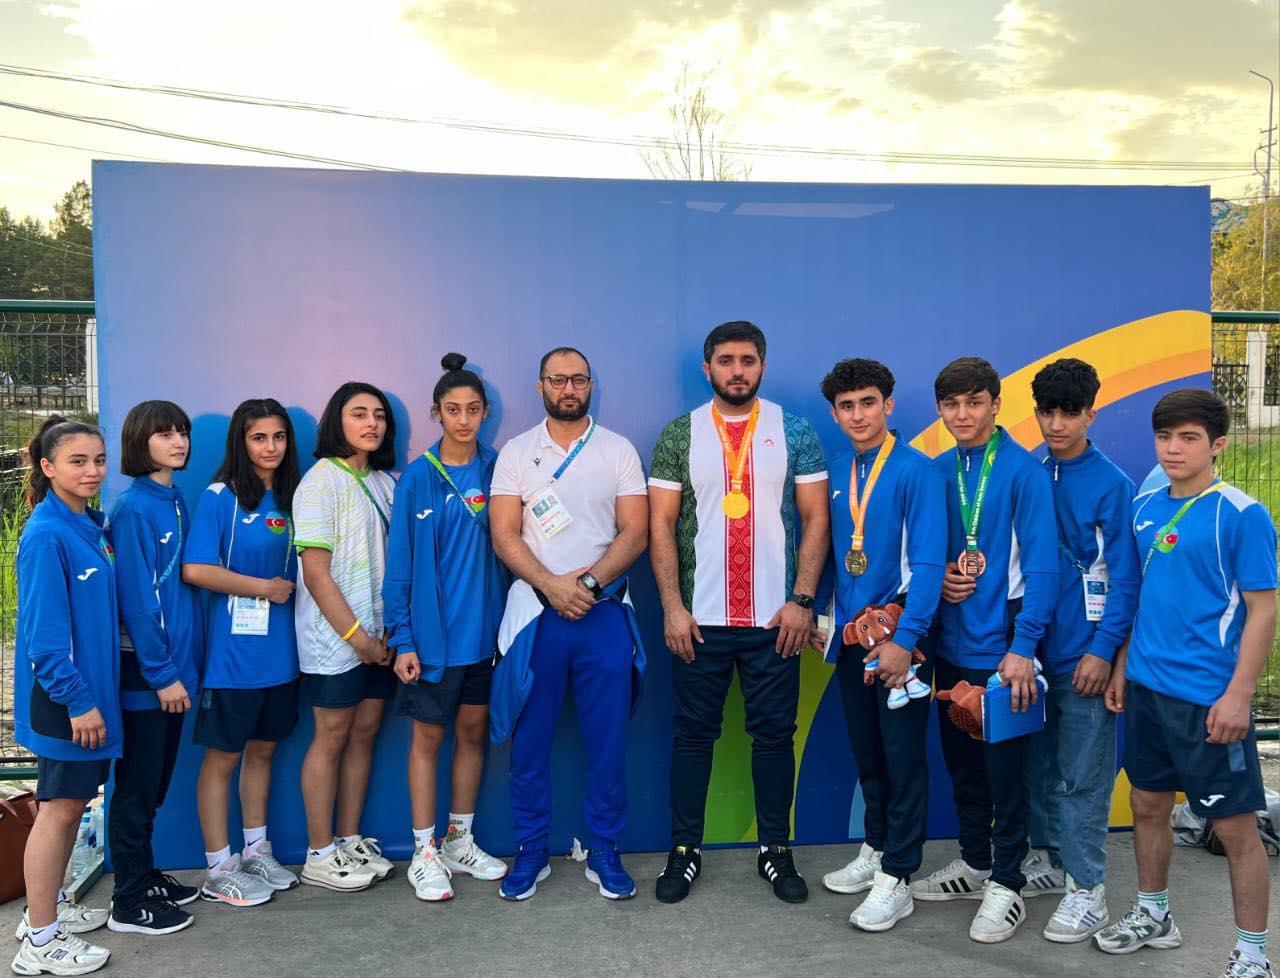 Azerbaijani judokas win two medals at Children of Asia Games